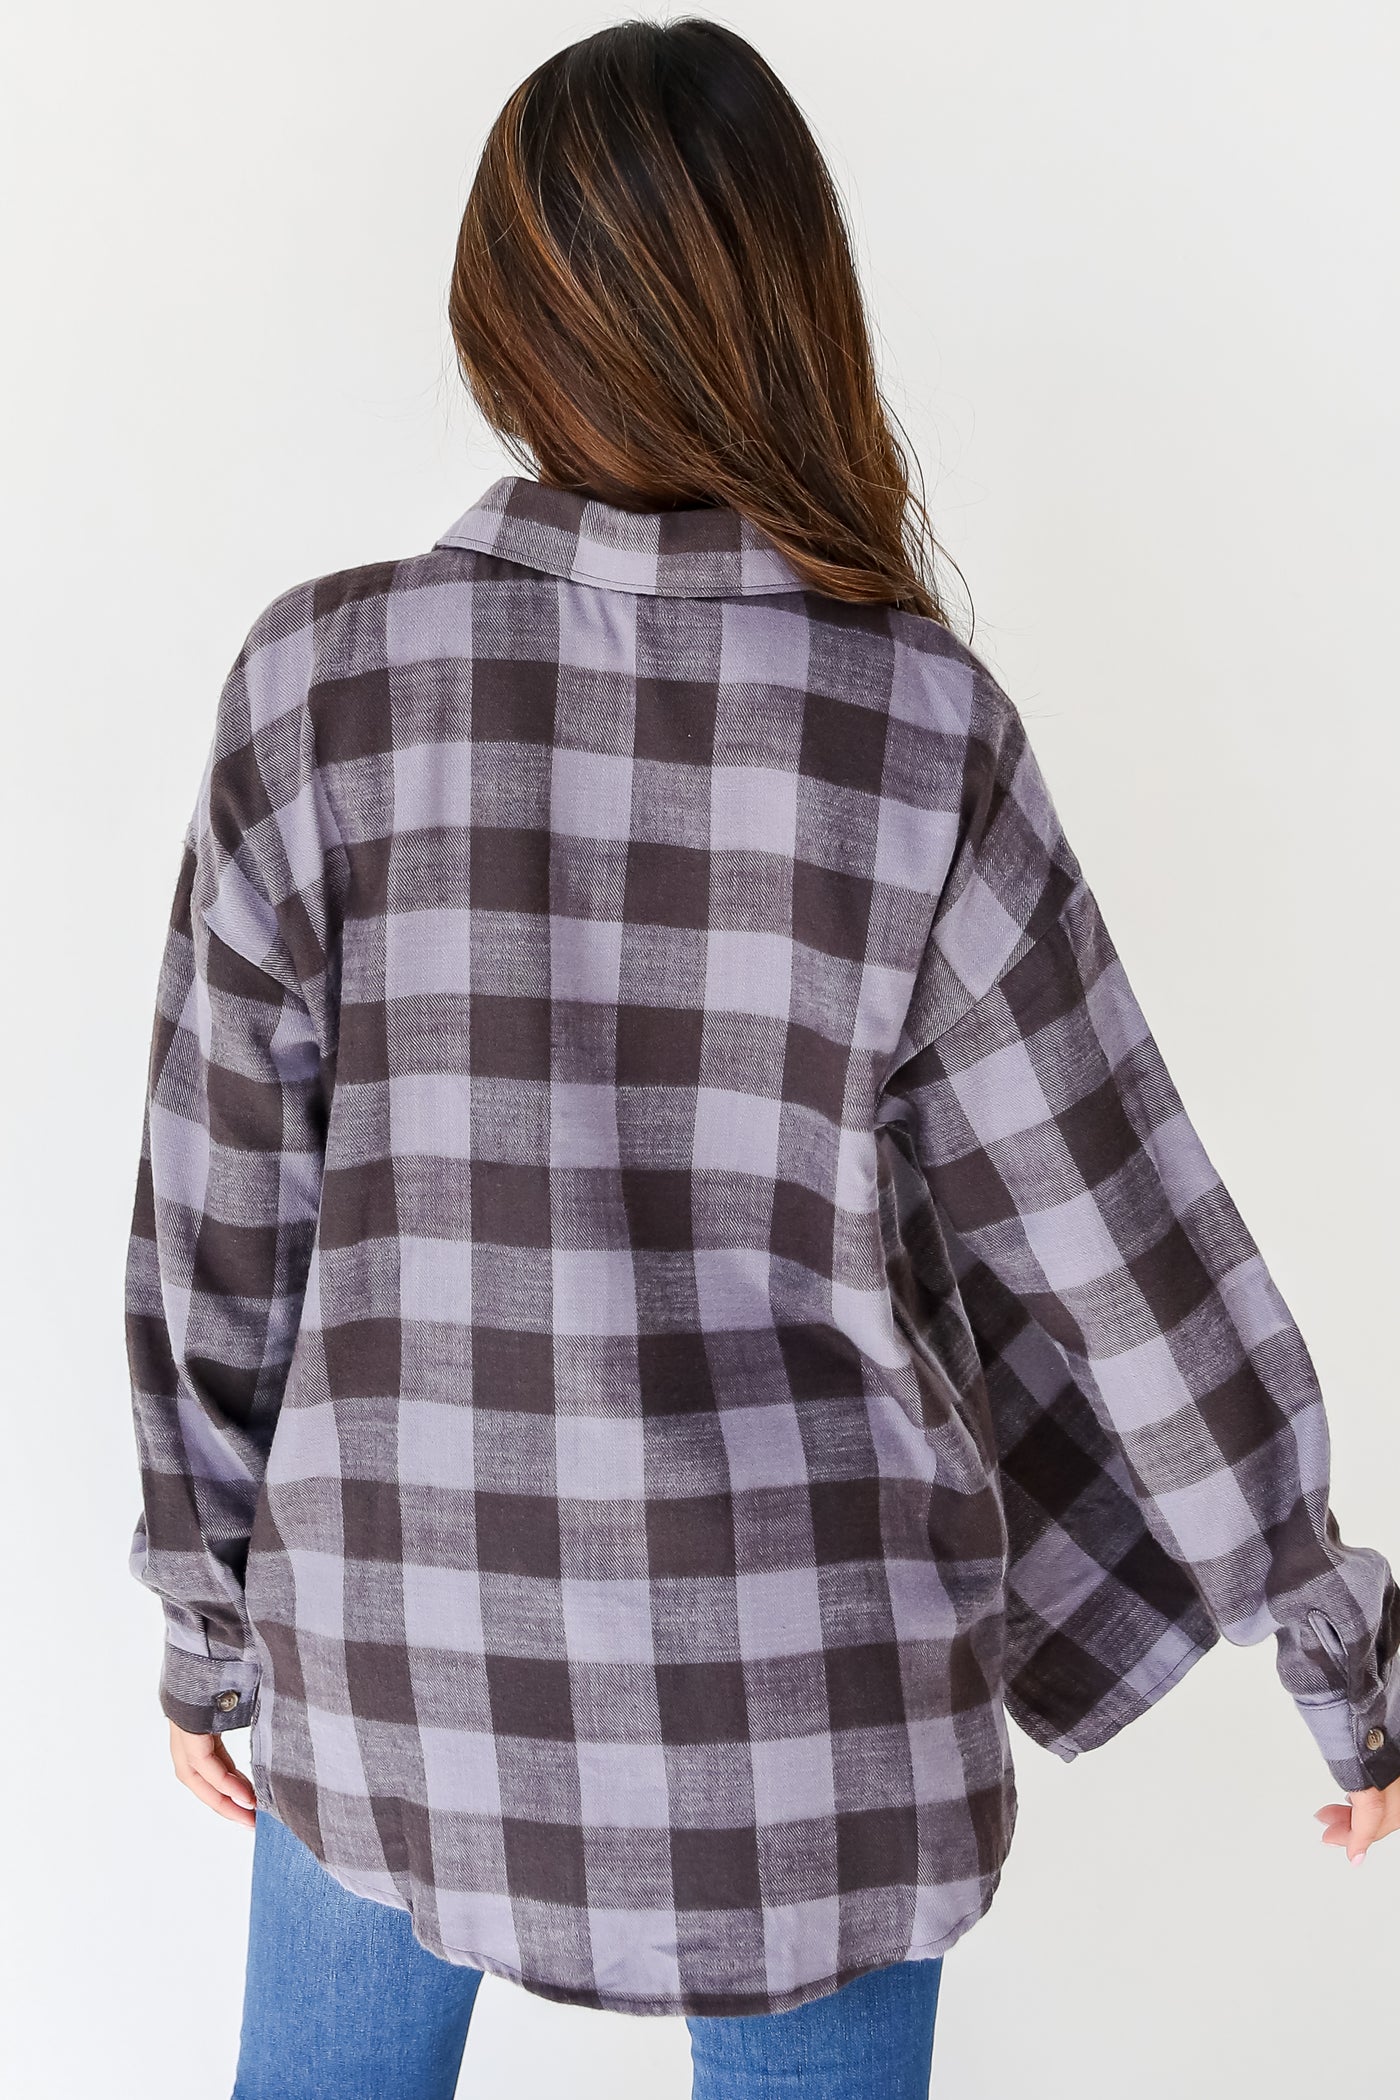 charcoal plaid flannel back view